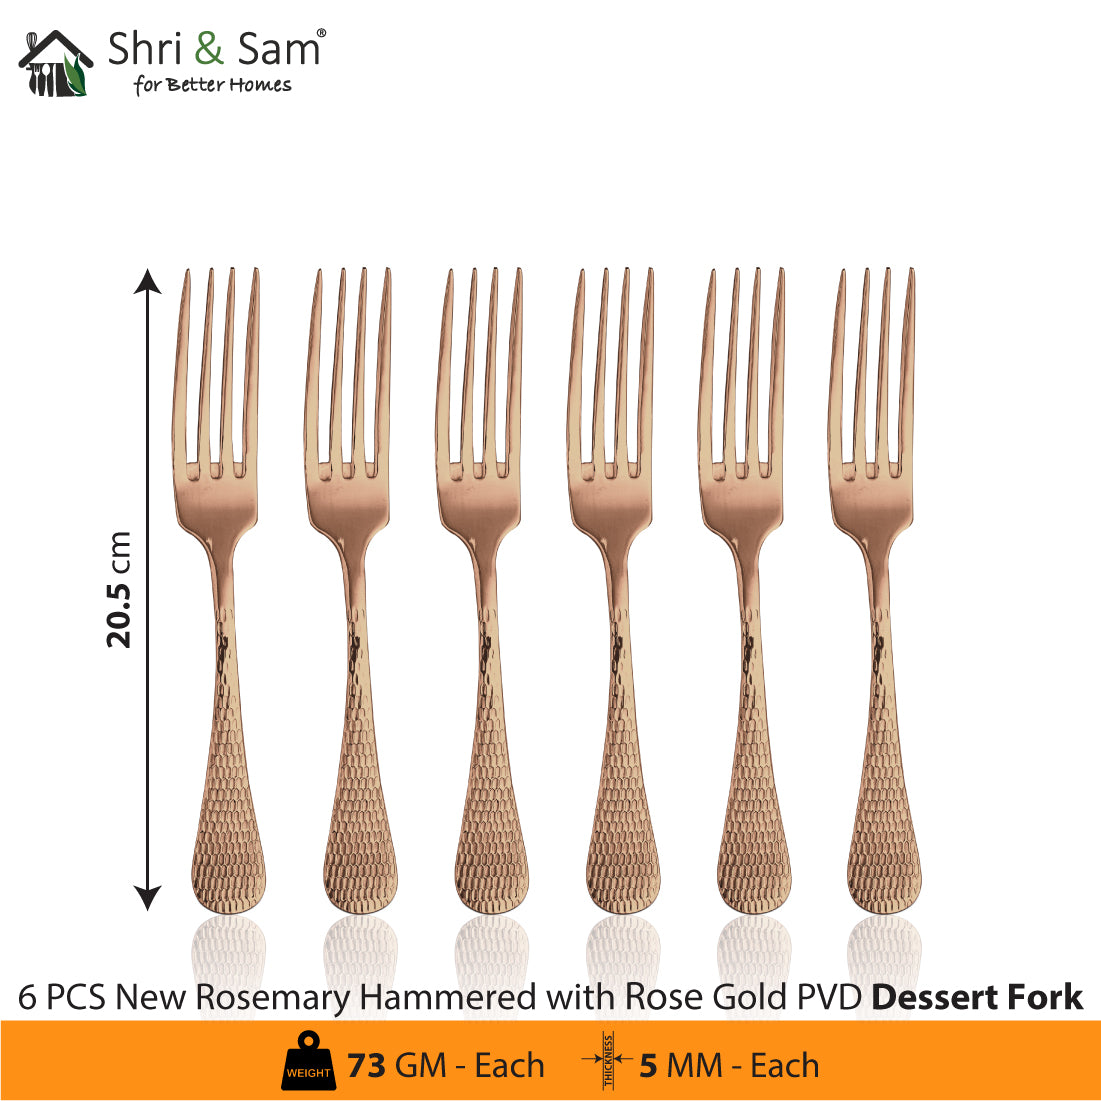 Stainless Steel 24 PCS Cutlery Set with Rose Gold PVD Coating New Rosemary Hammered